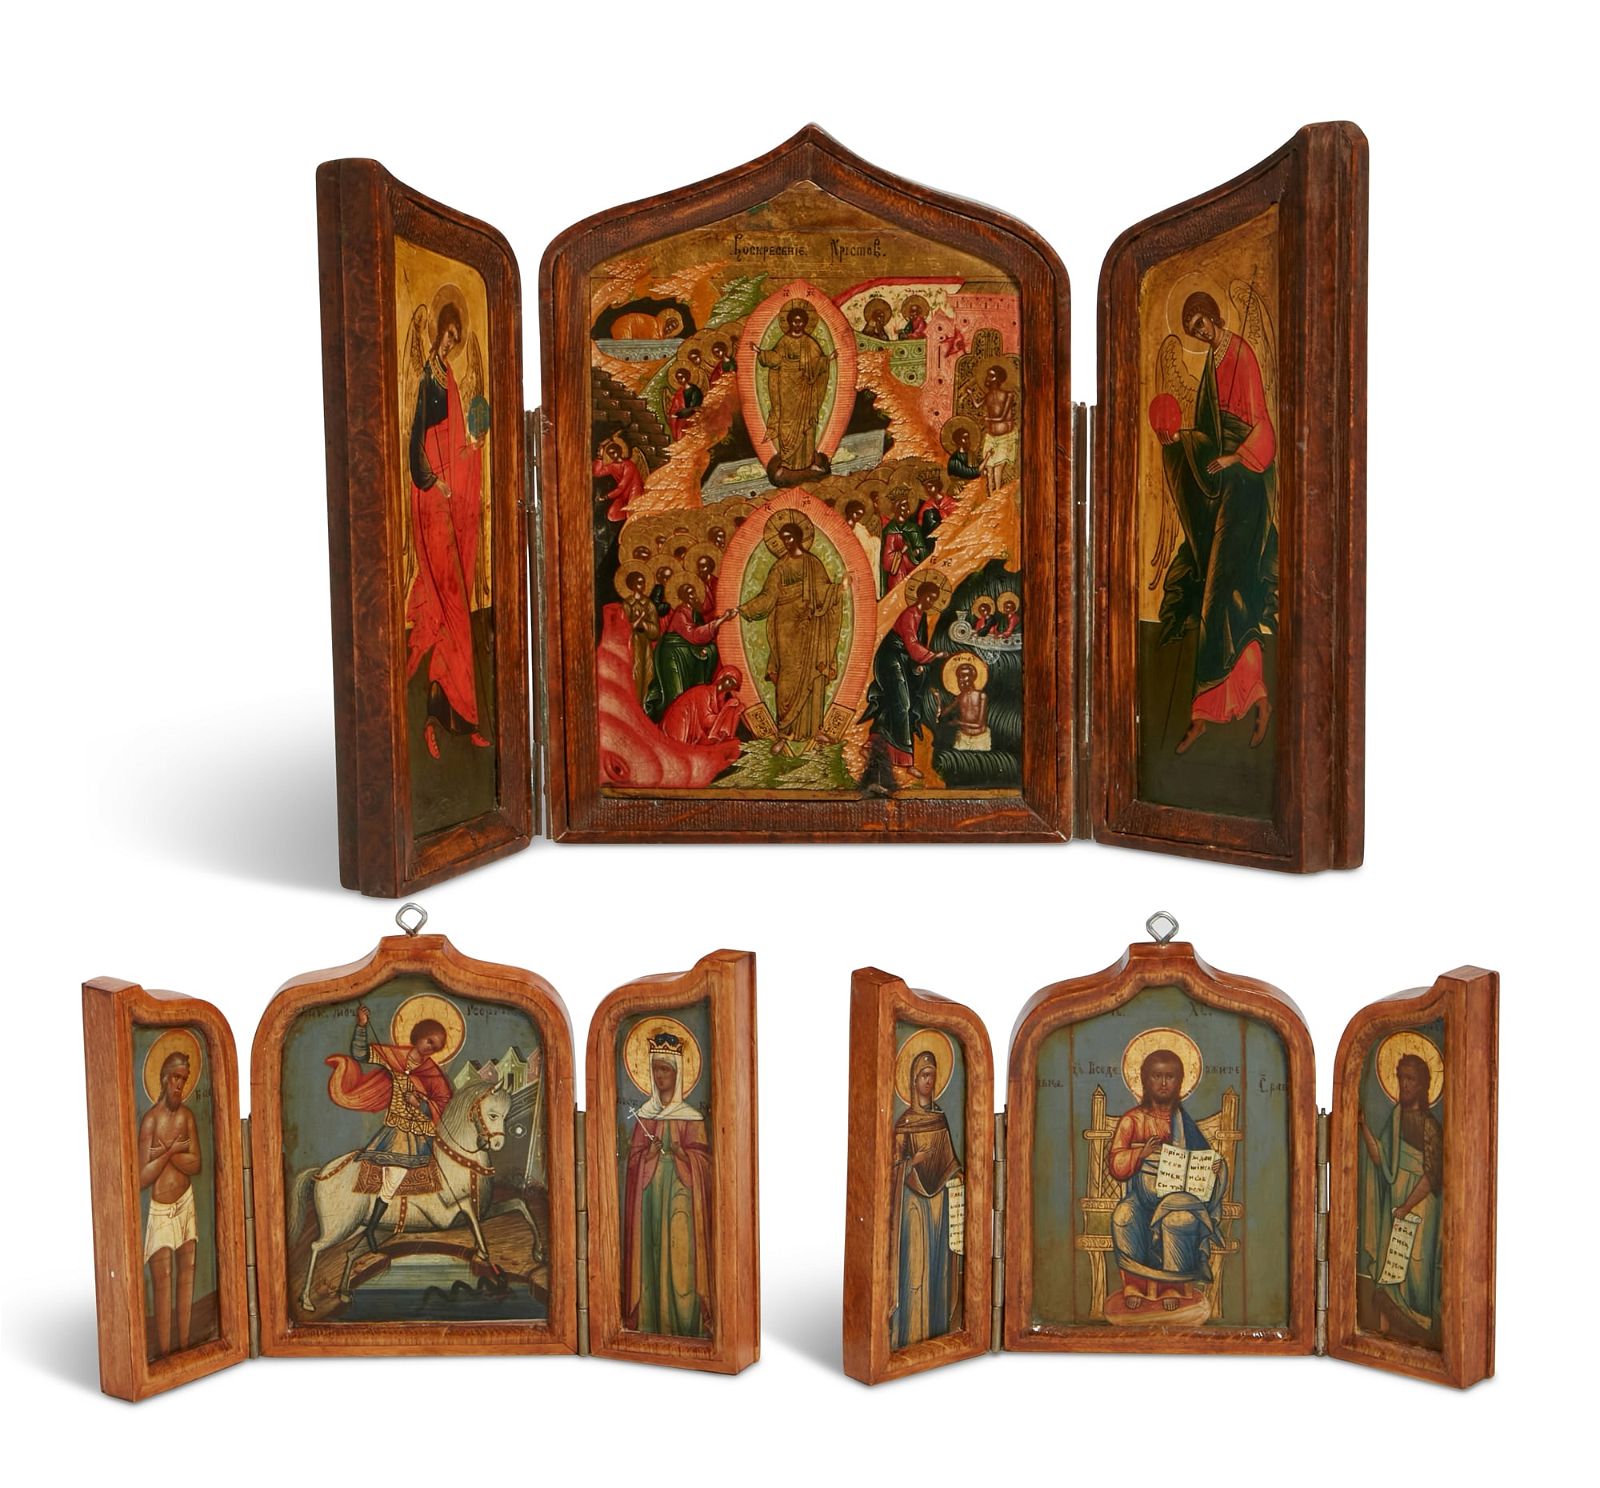 THREE RUSSIAN TRIPTYCH ICONS, 19TH-20TH